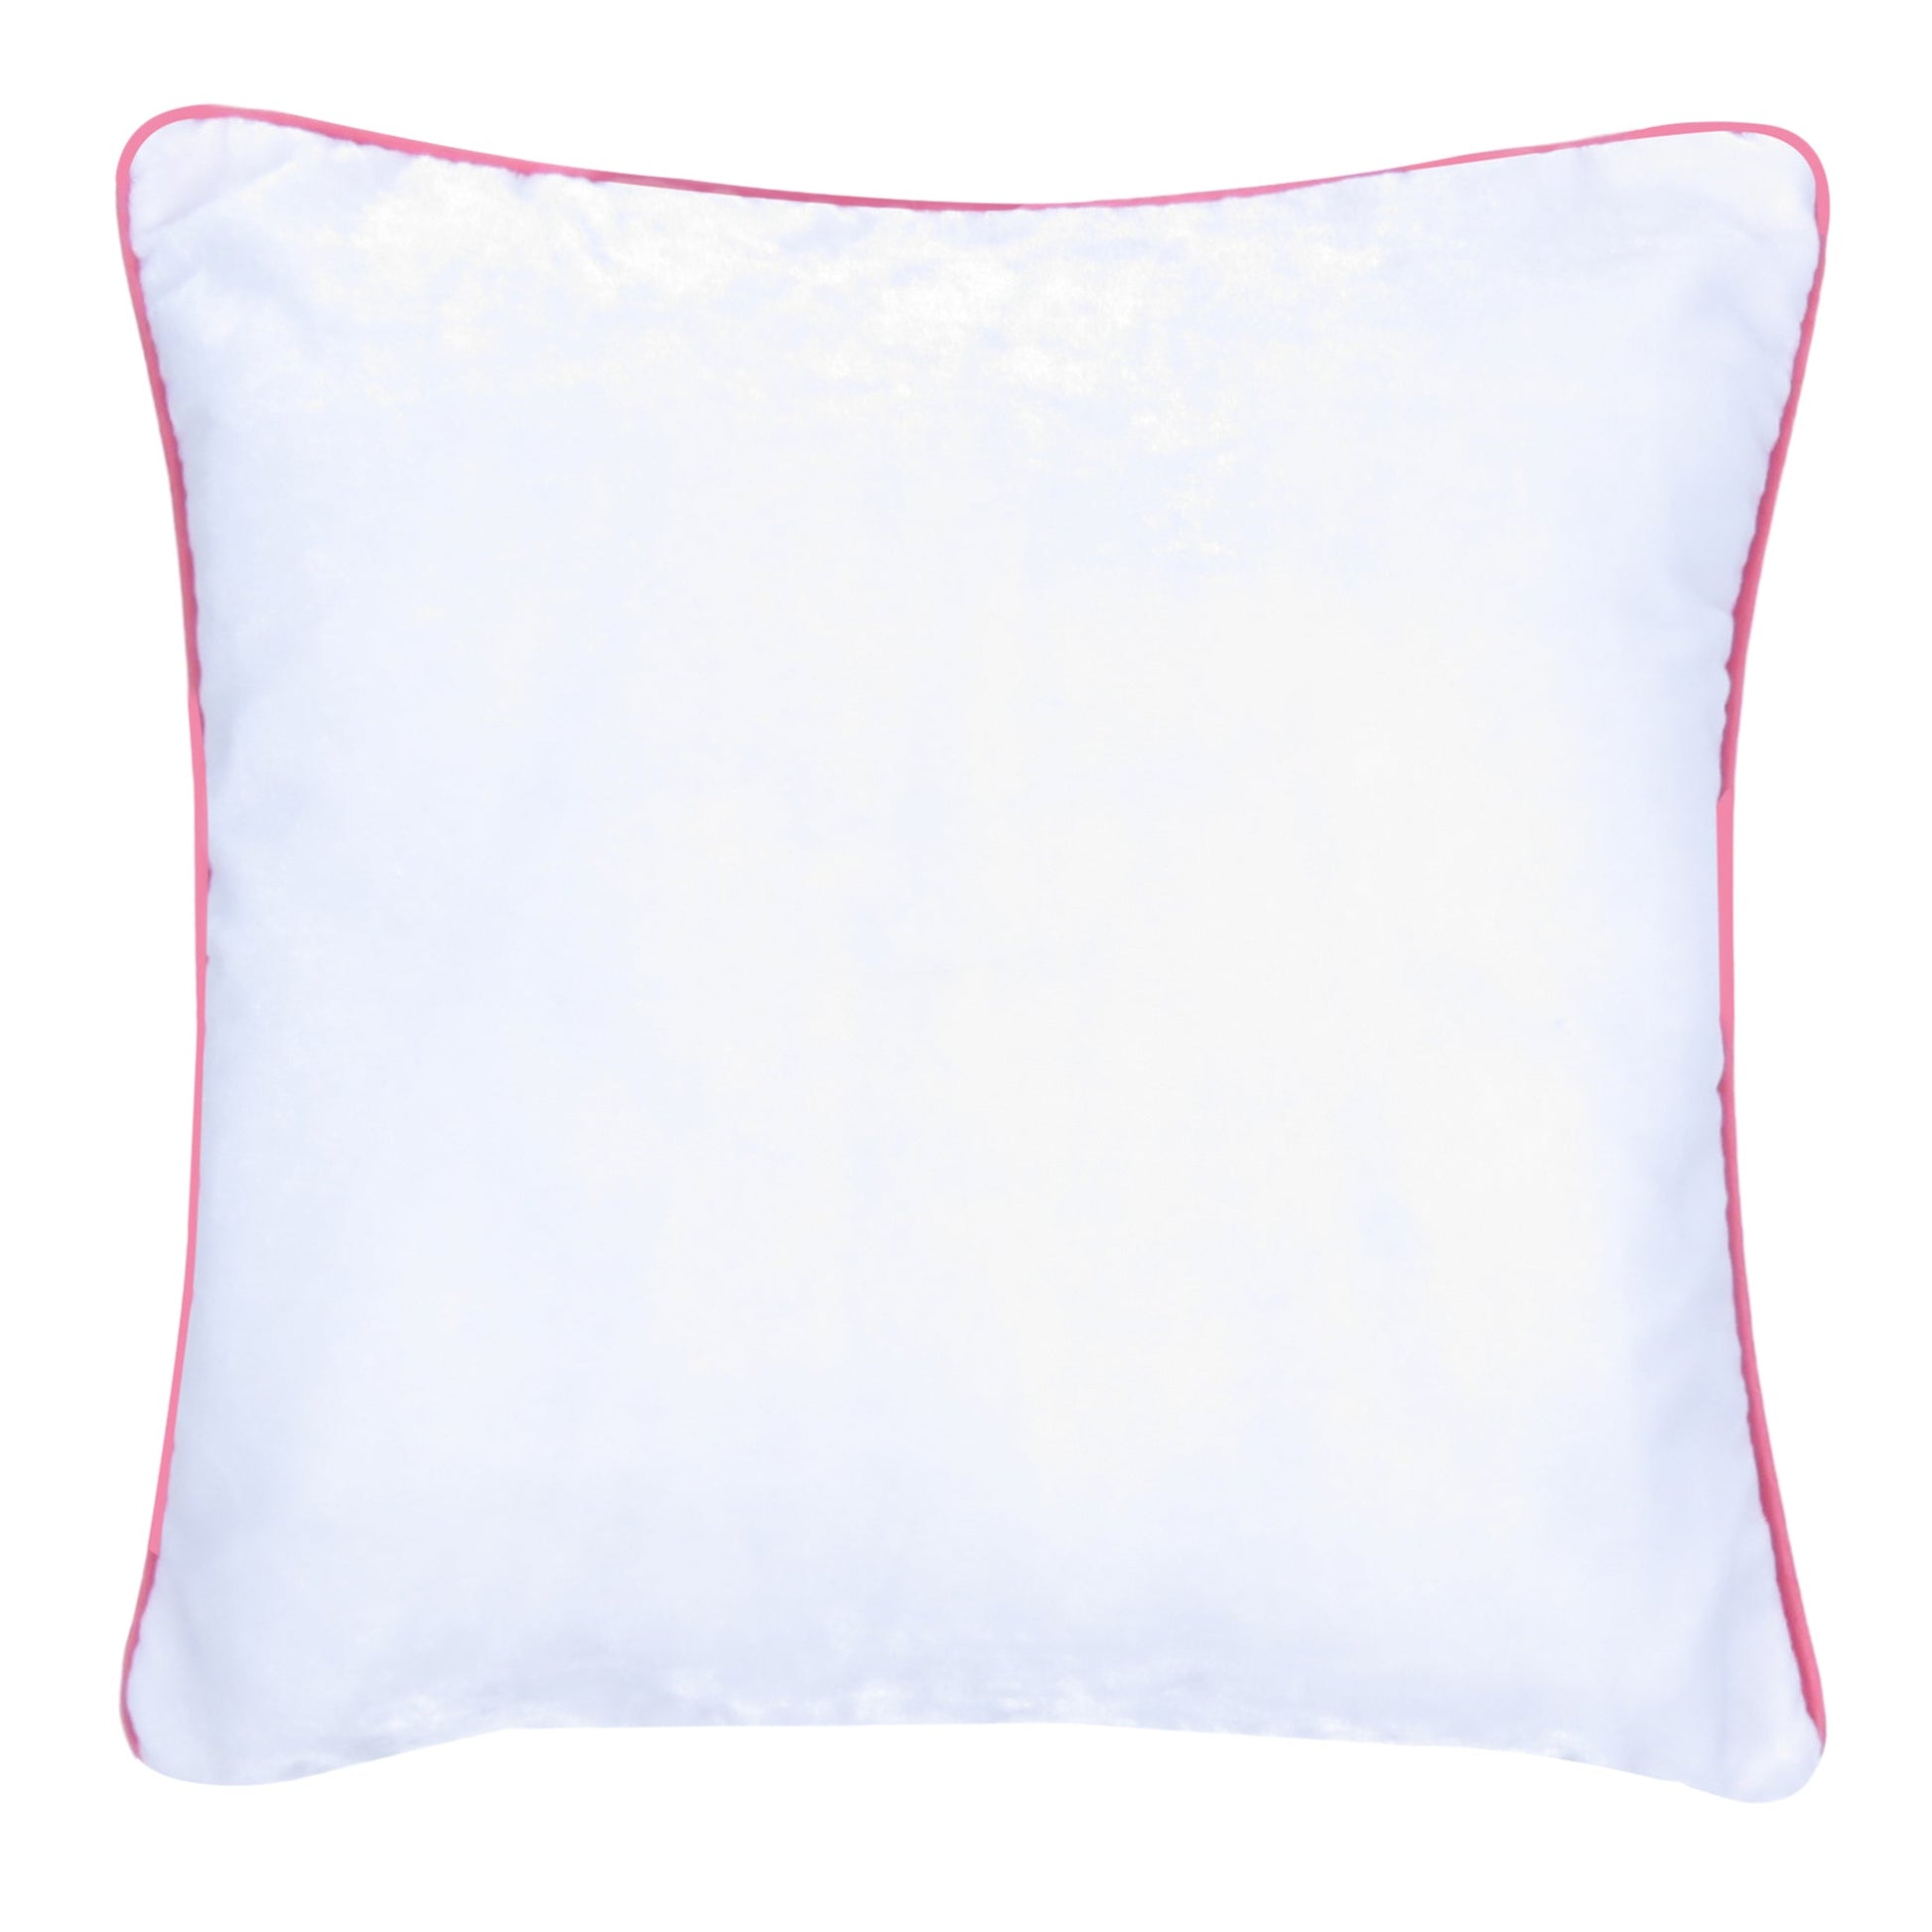 White Velvet Cushion Cover with Light Pink Piping Edge in Set of 2